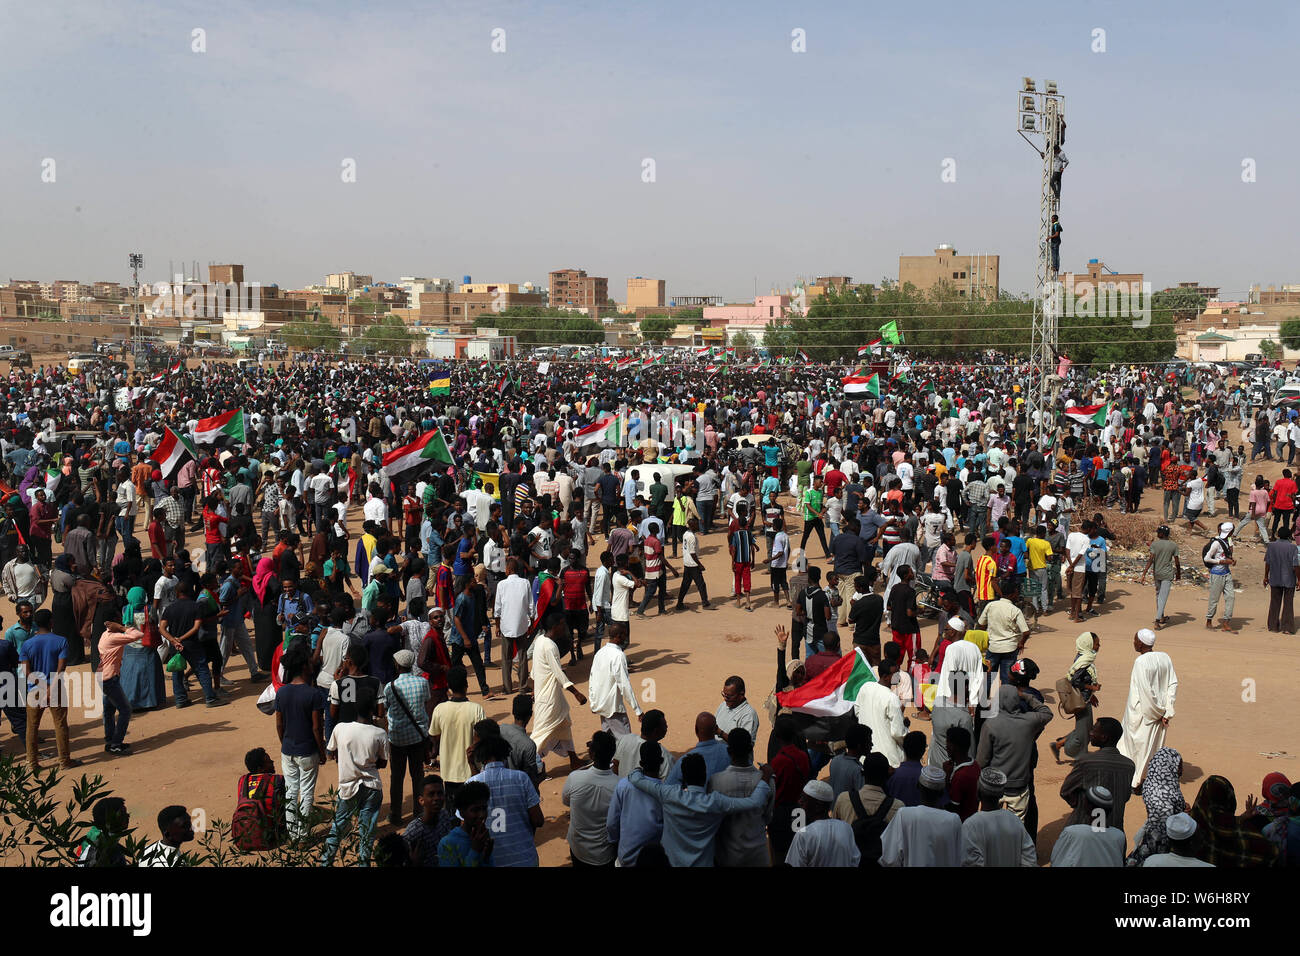 (190801) -- KHARTOUM, Aug. 1, 2019 (Xinhua) -- Sudanese people take part in a demonstration in Khartoum, Sudan, on Aug. 1, 2019. Five people were killed and dozens of others injured during a shooting attack in El Obeid city on July 29. The incident sparked a wave of anger and widespread protests across Sudanese cities. (Photo by Mohamed Khidir/Xinhua) Stock Photo